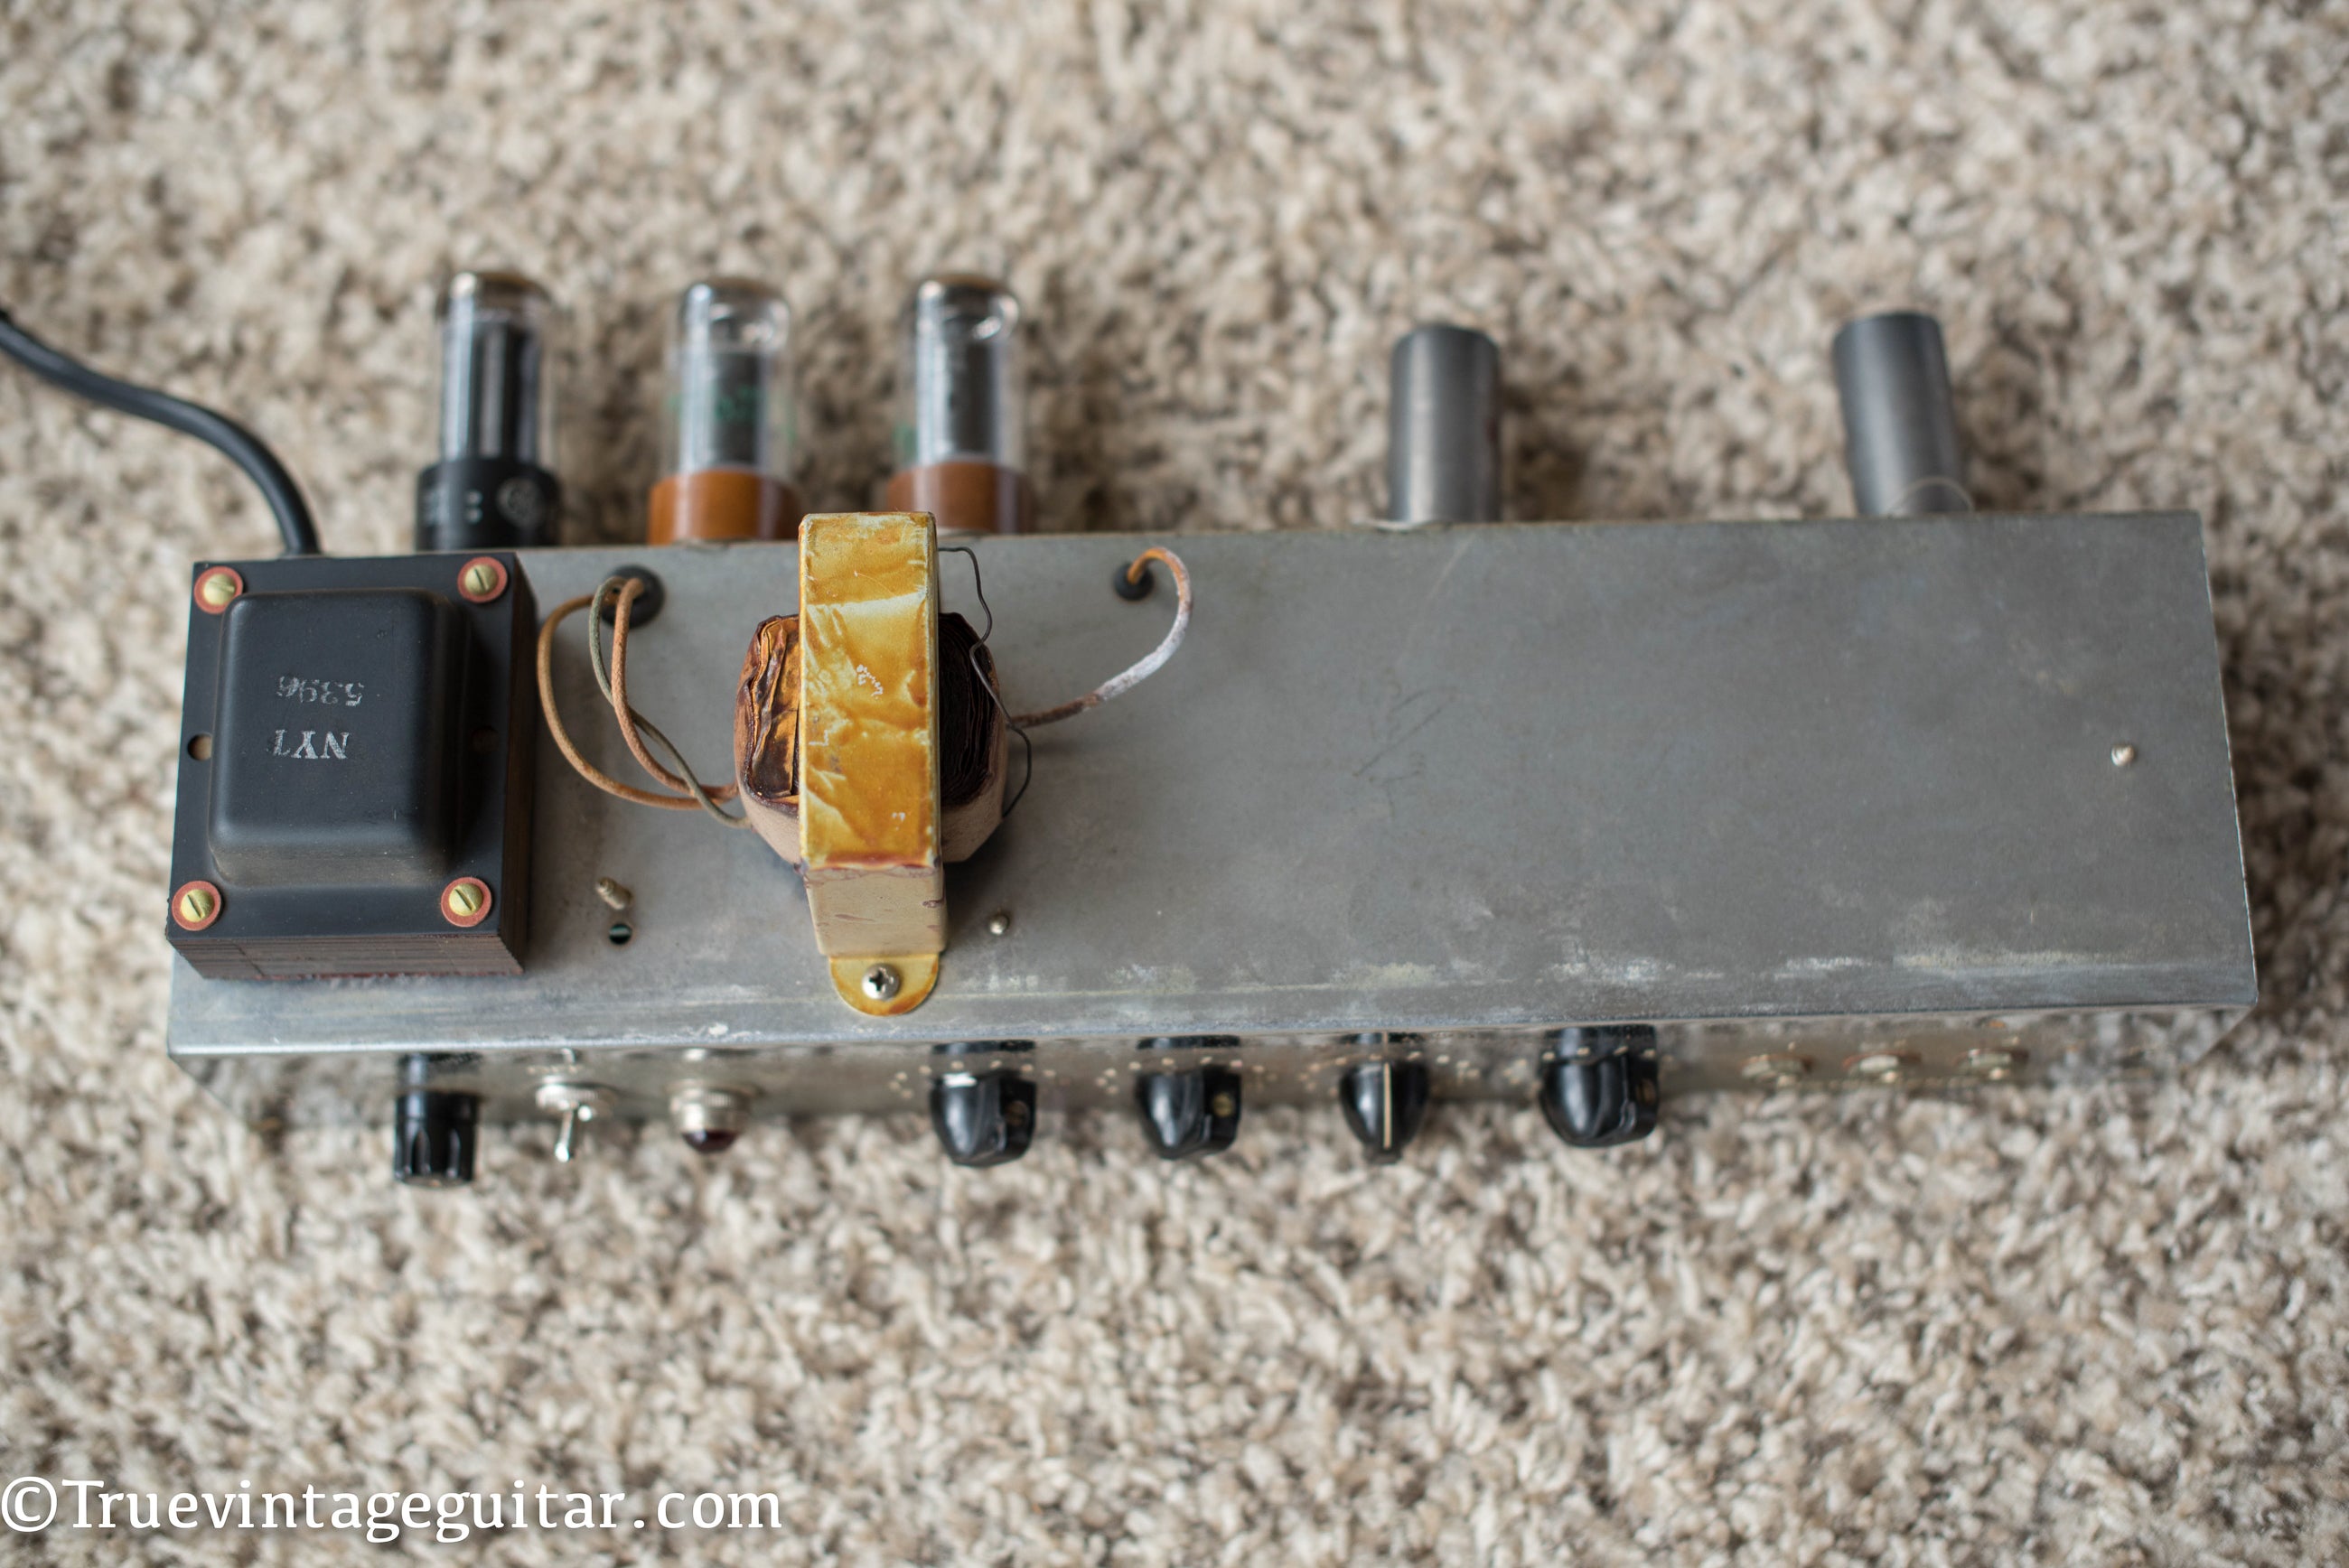 Output transformer, power transformer, chassis, 1957 Fender Vibrolux amp